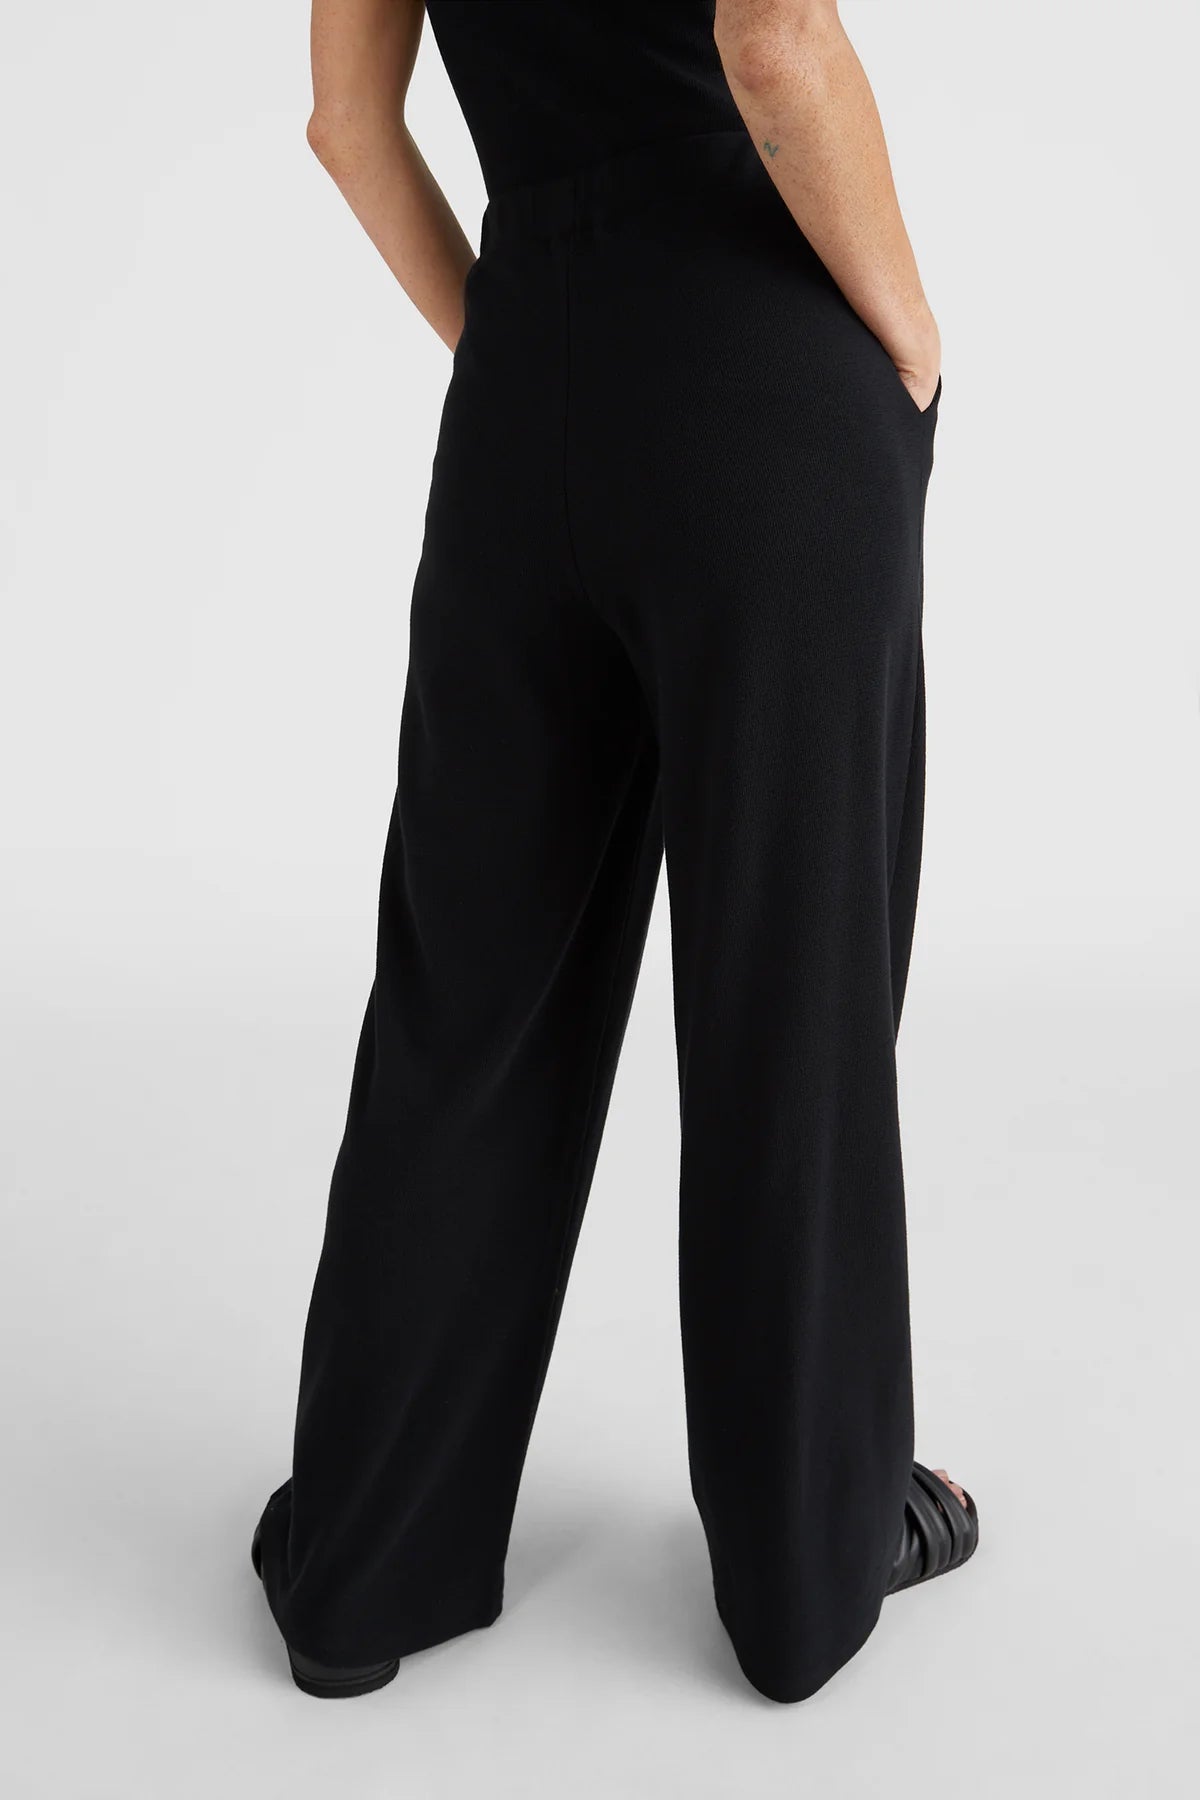 O'Neill Structure Jogger Pants (Non-Current)